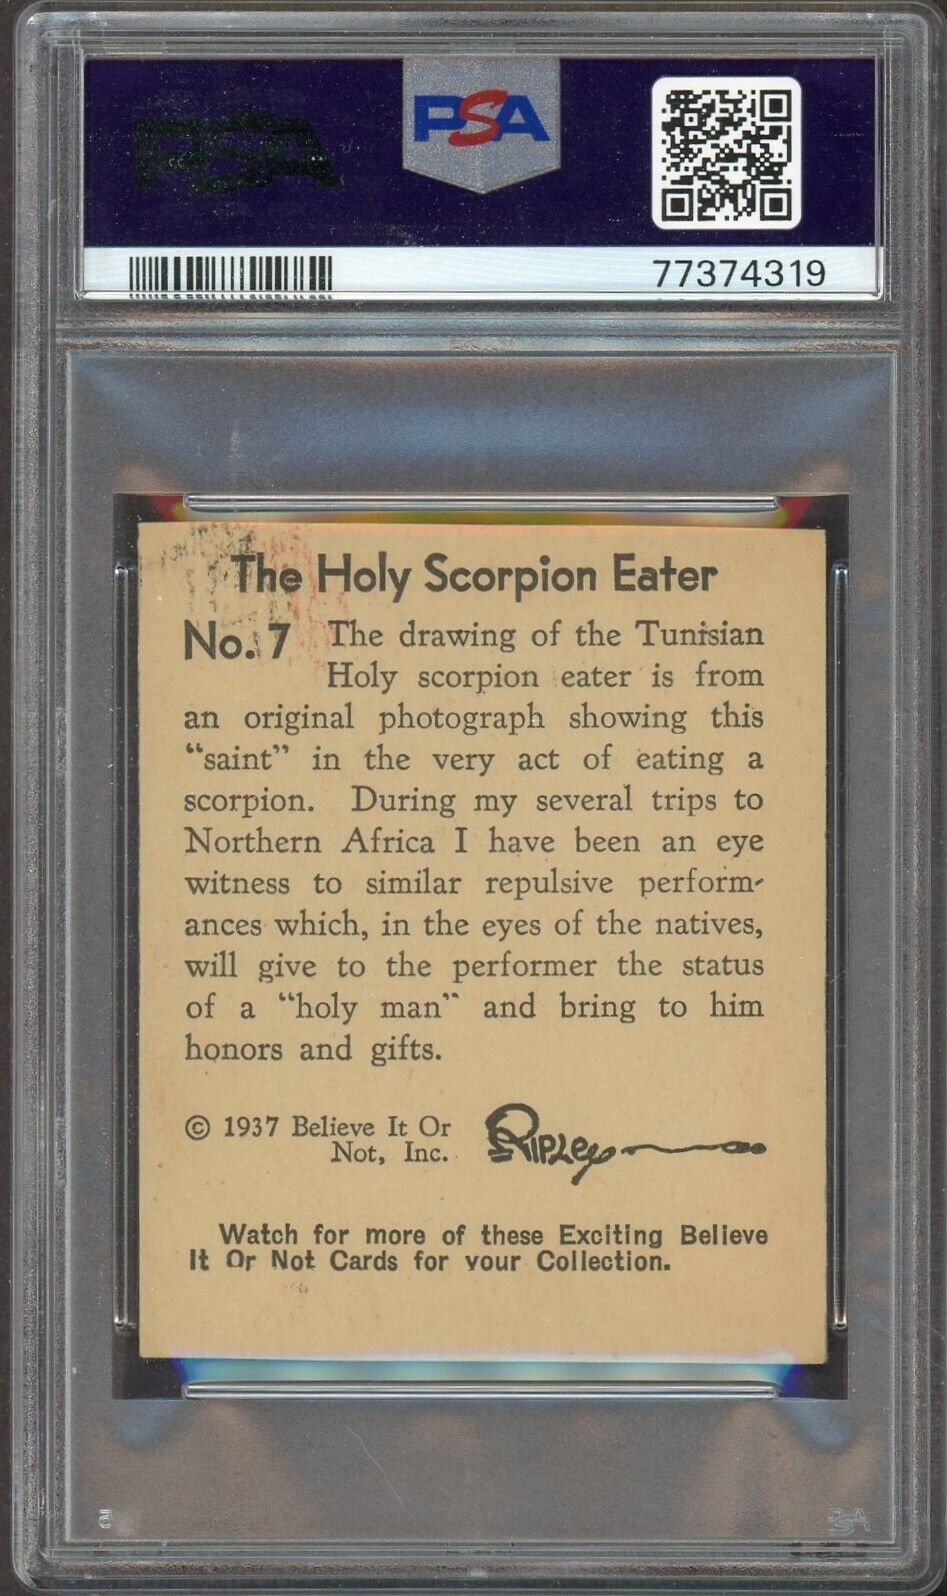 1937 Ripley's Believe It Or Not #7 Holy Scorpion Eater (PSA 5 EX) Gum Card